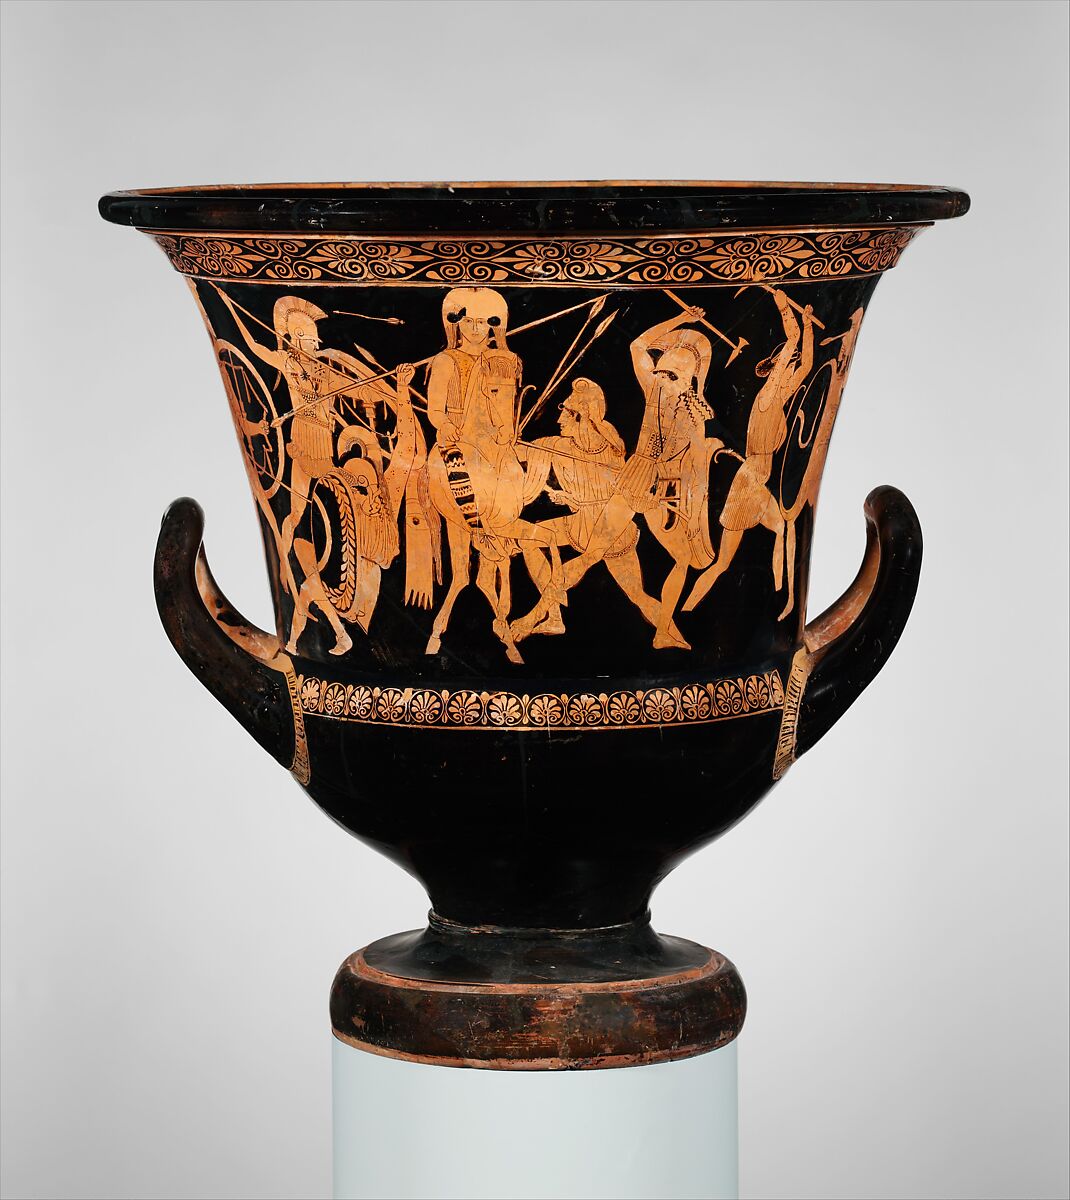 Terracotta calyx-krater (bowl for mixing wine and water), Attributed to the Painter of the Berlin Hydria, Terracotta, Greek, Attic 